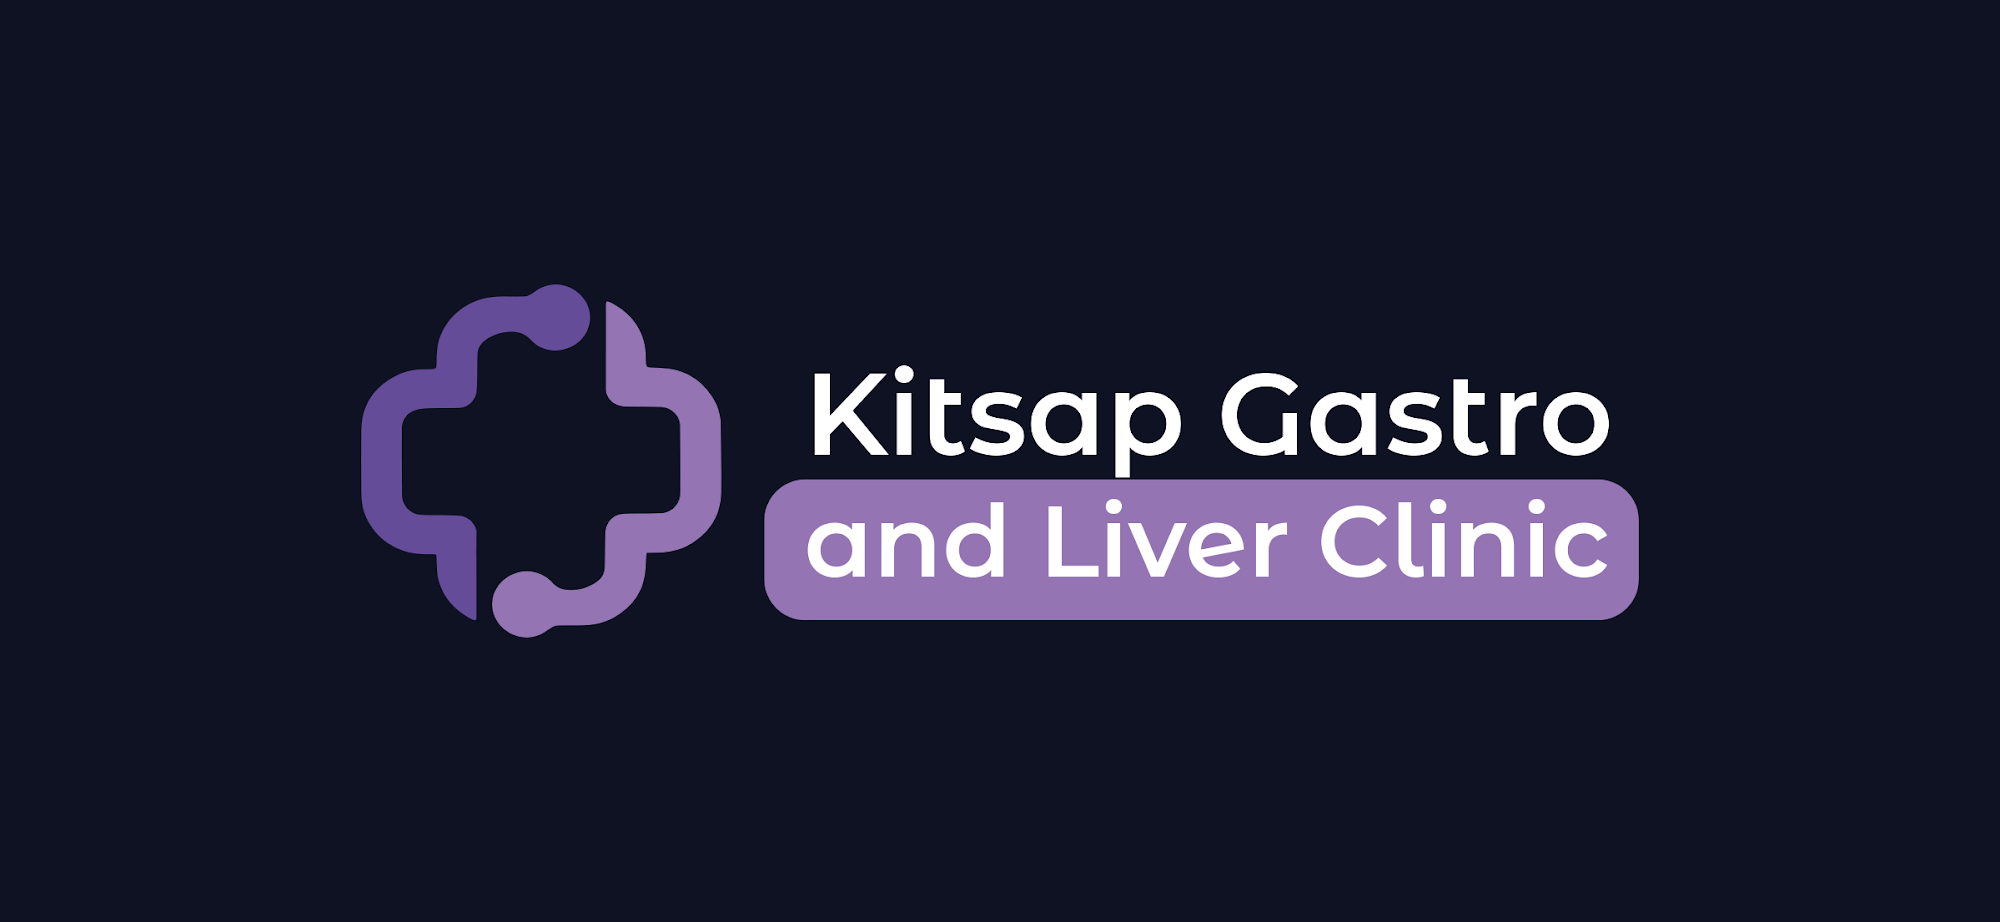 Kitsap Gastro and Liver Clinic